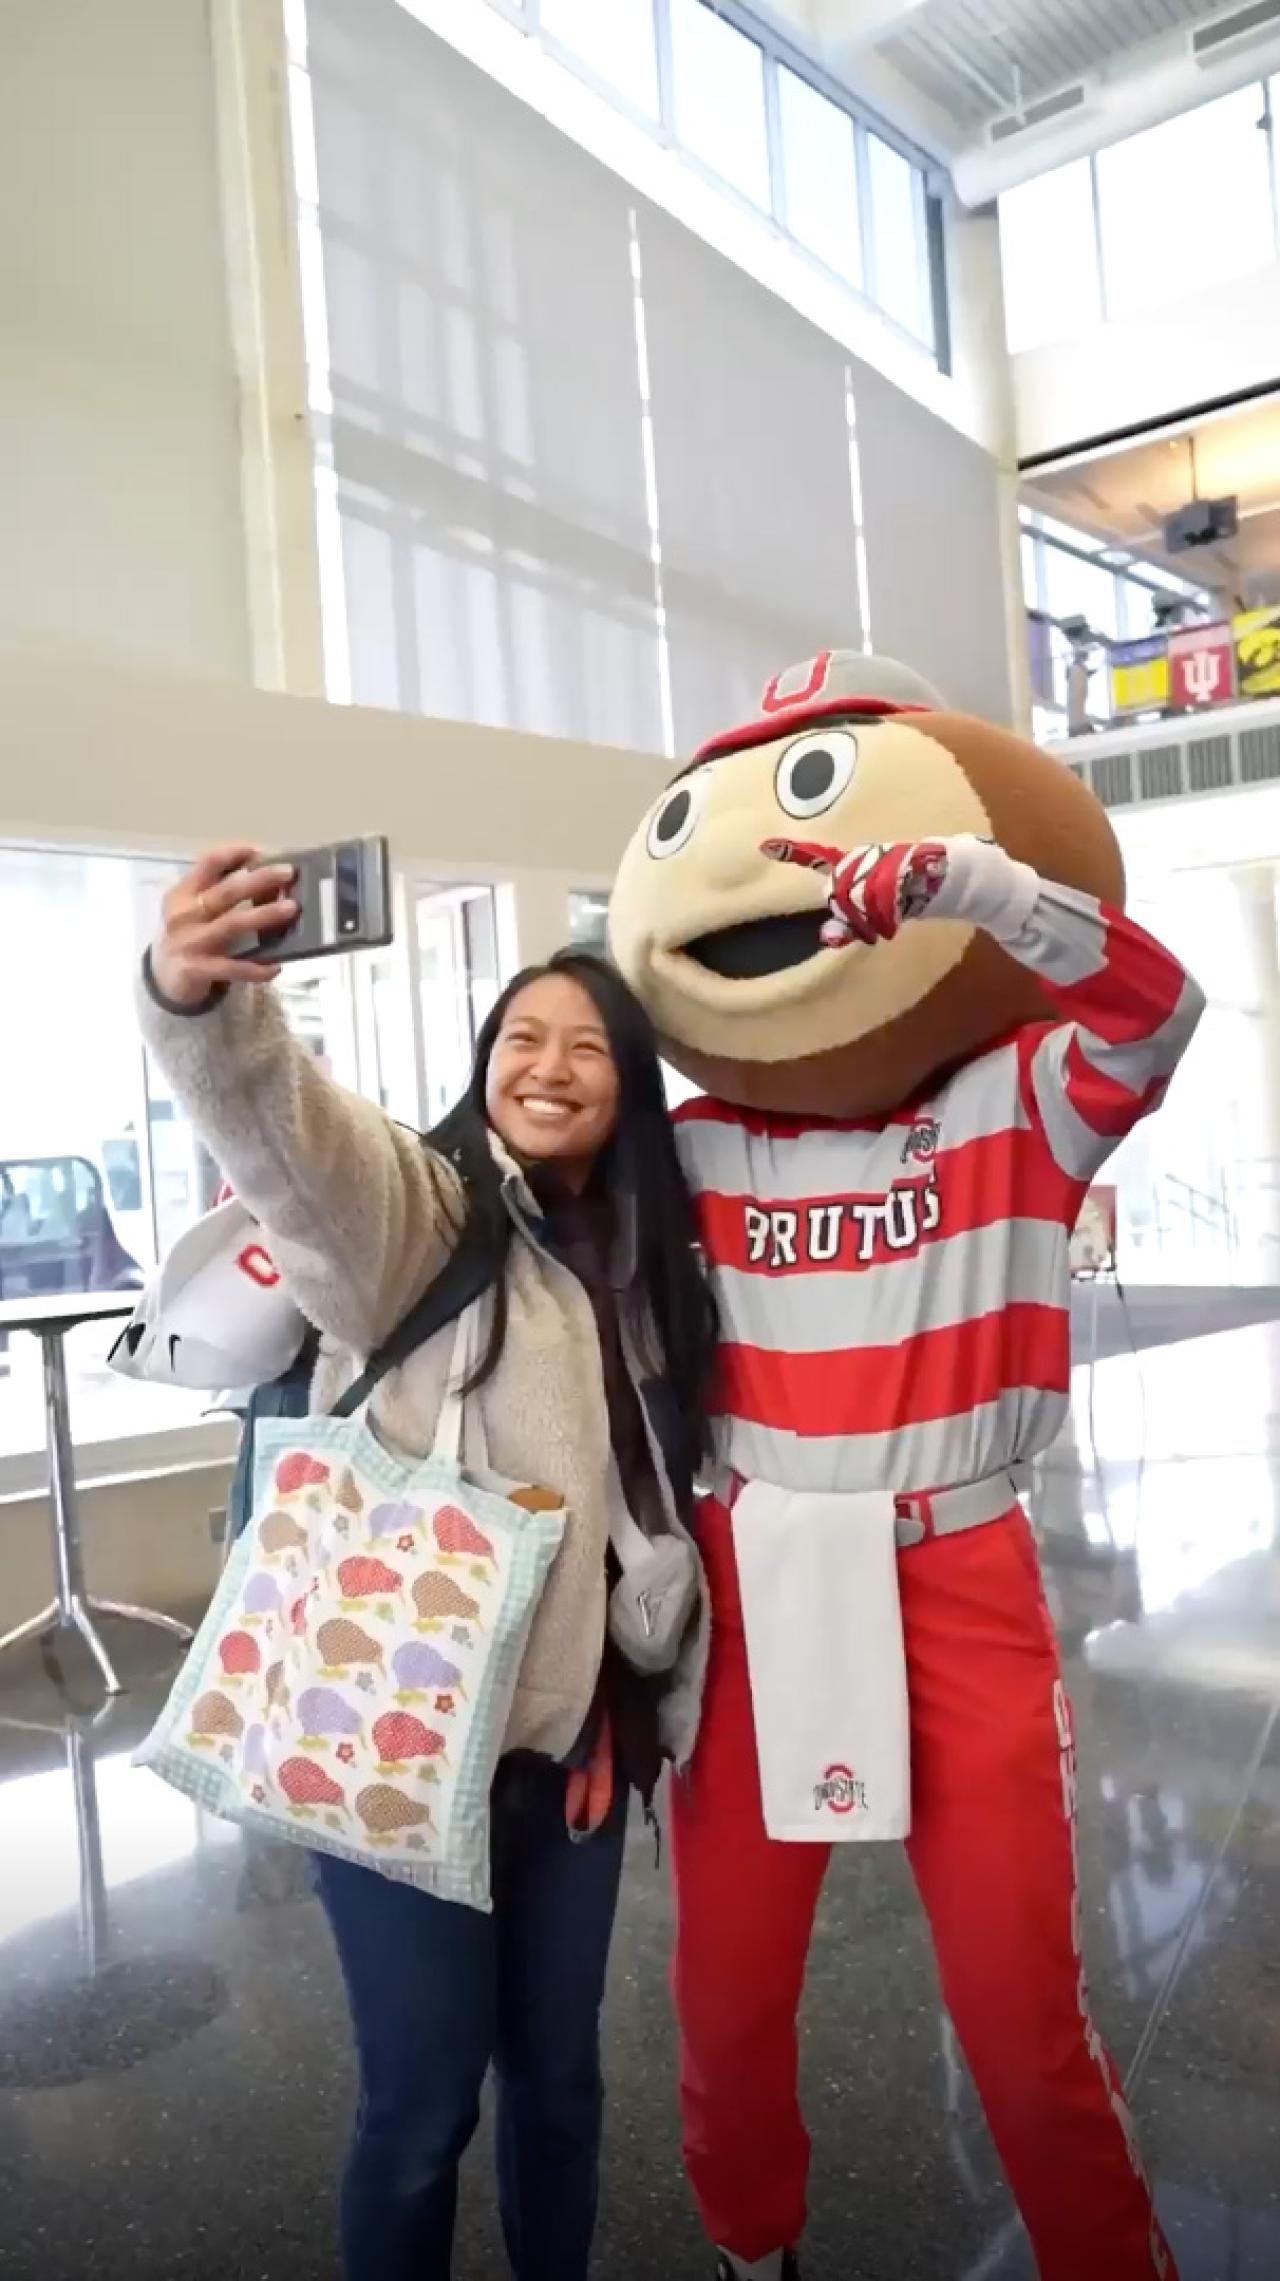 Woman taking selfie with Brutus